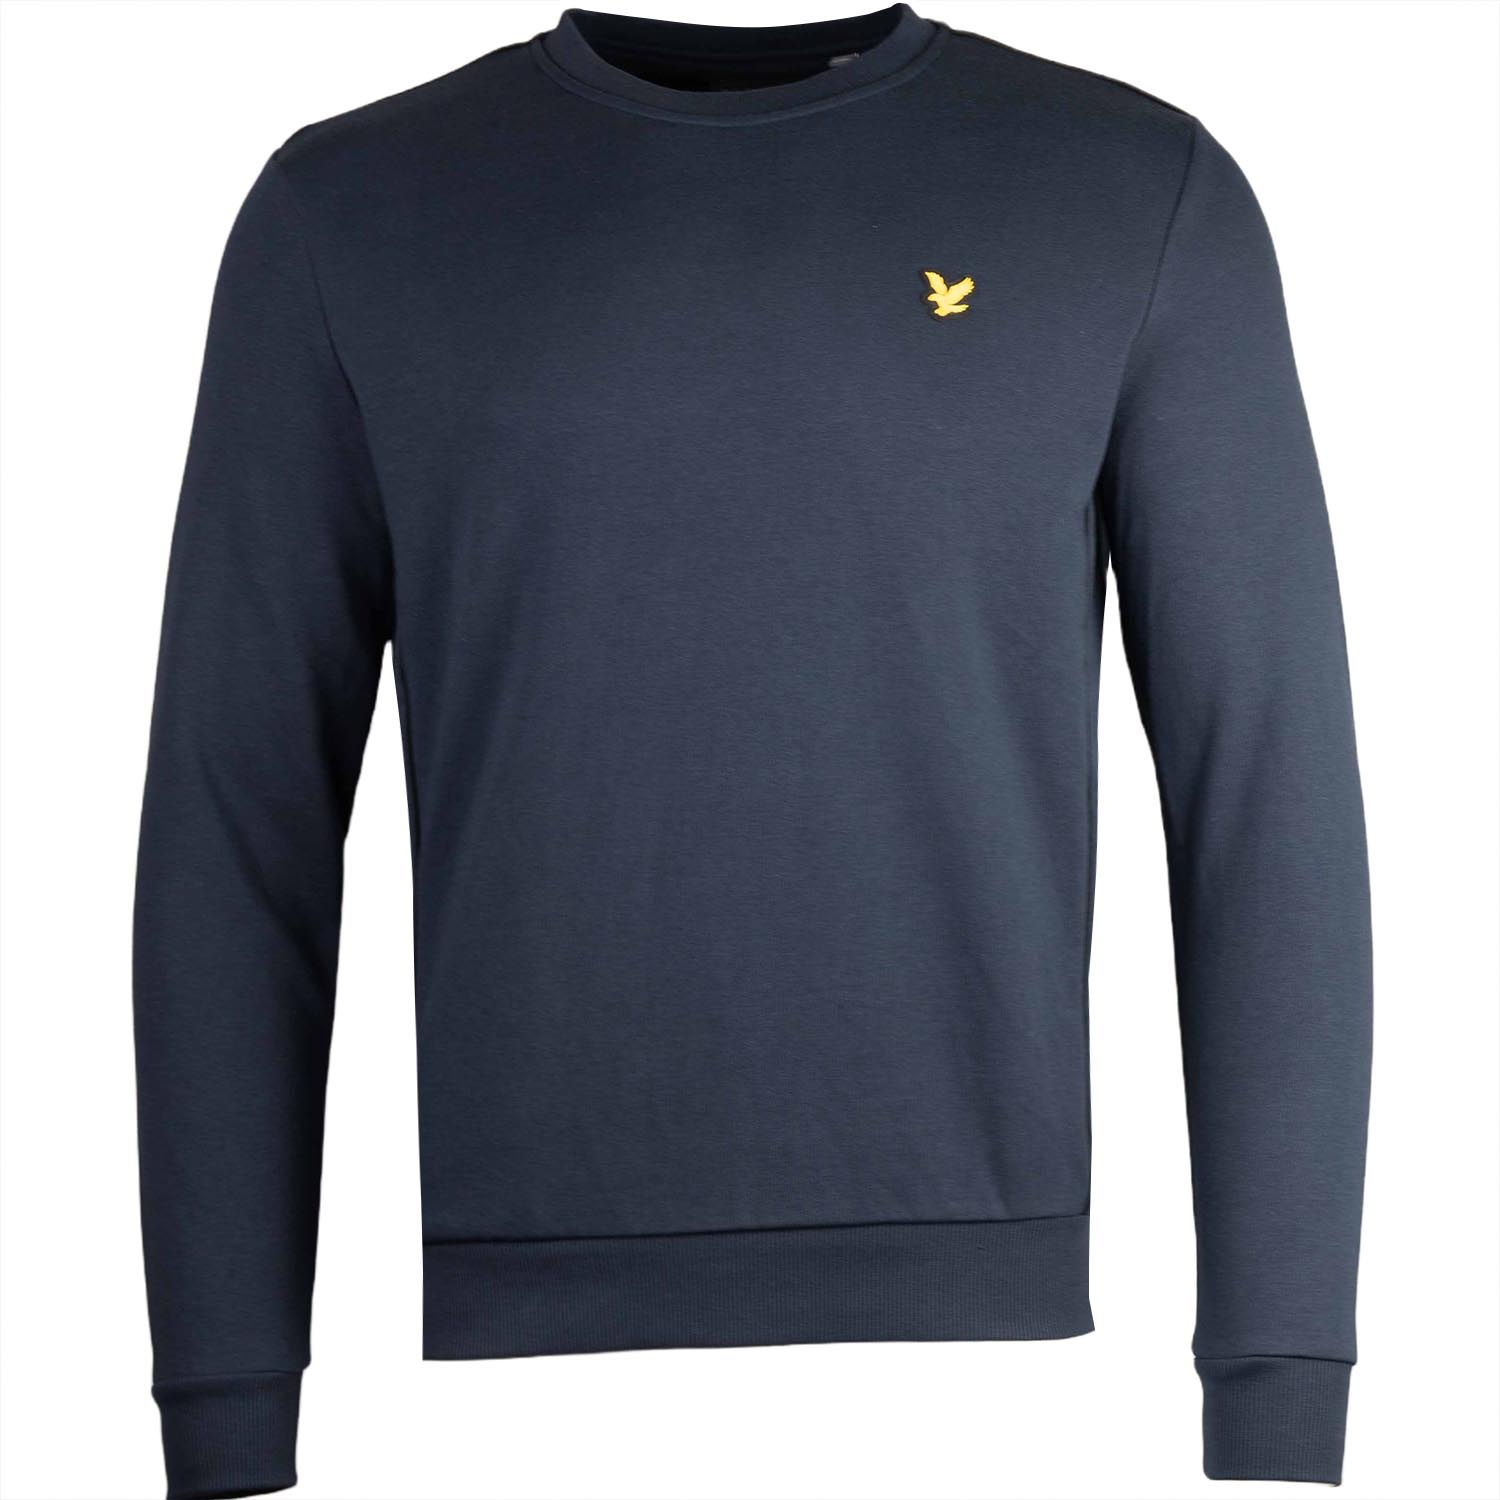 Lyle & Scott Contrast Piping Crew Neck Sweater